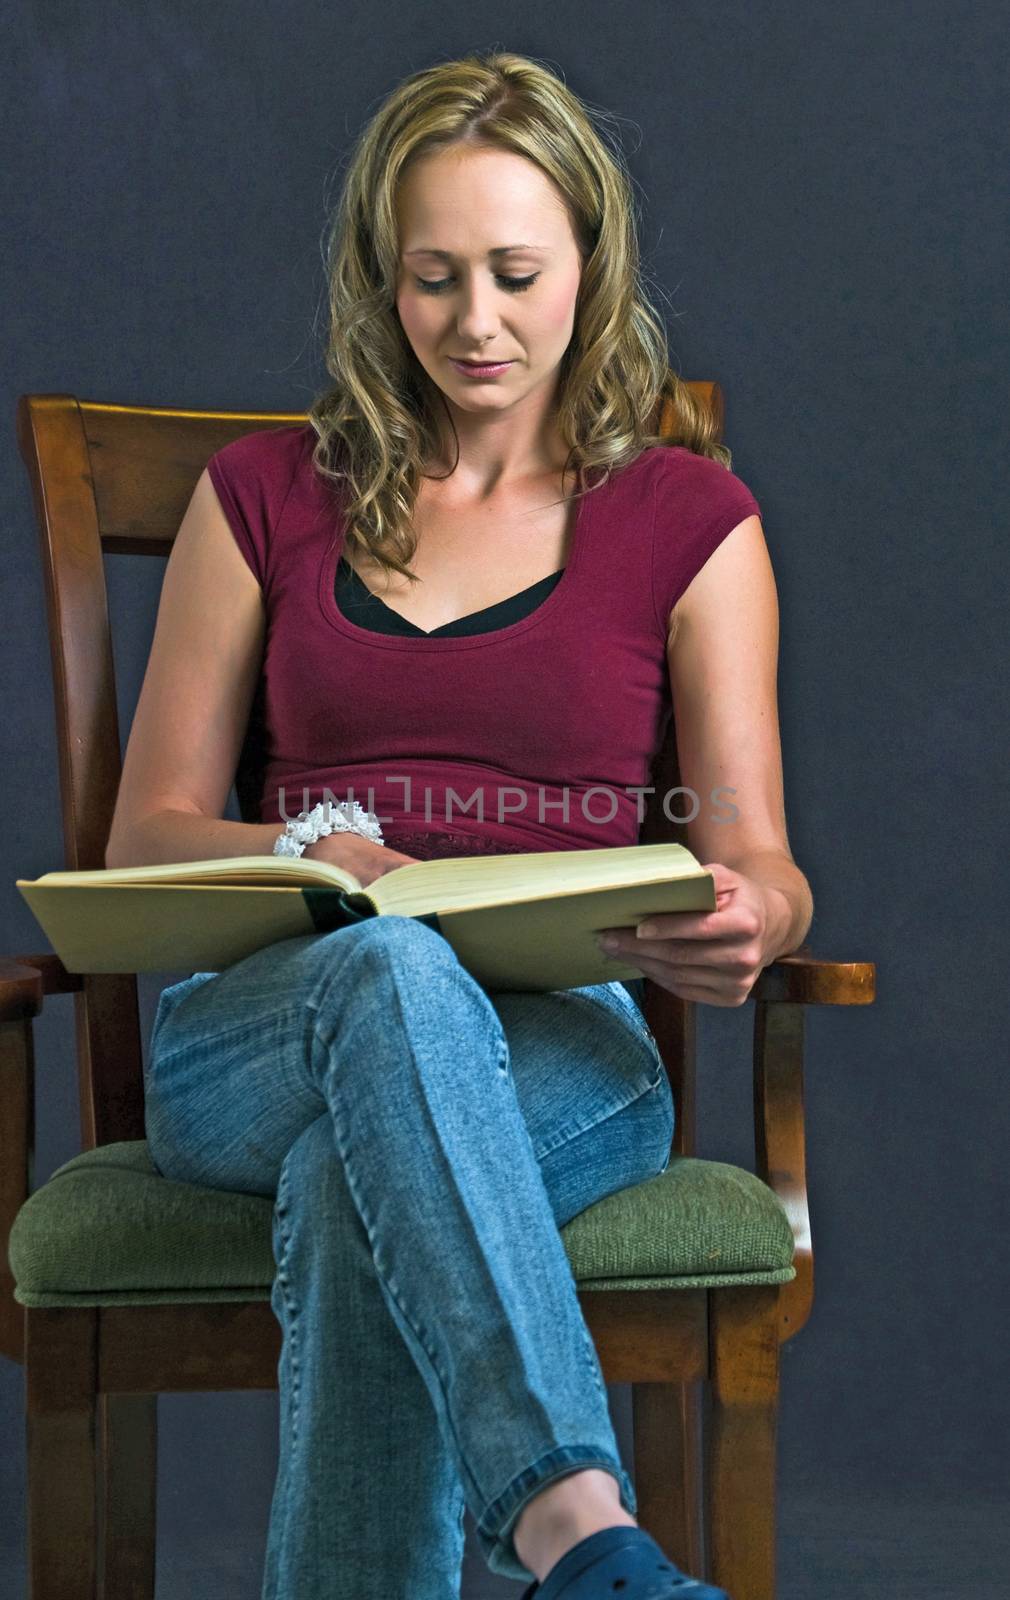 Pretty young lady seated in an arm chair reading a research book.